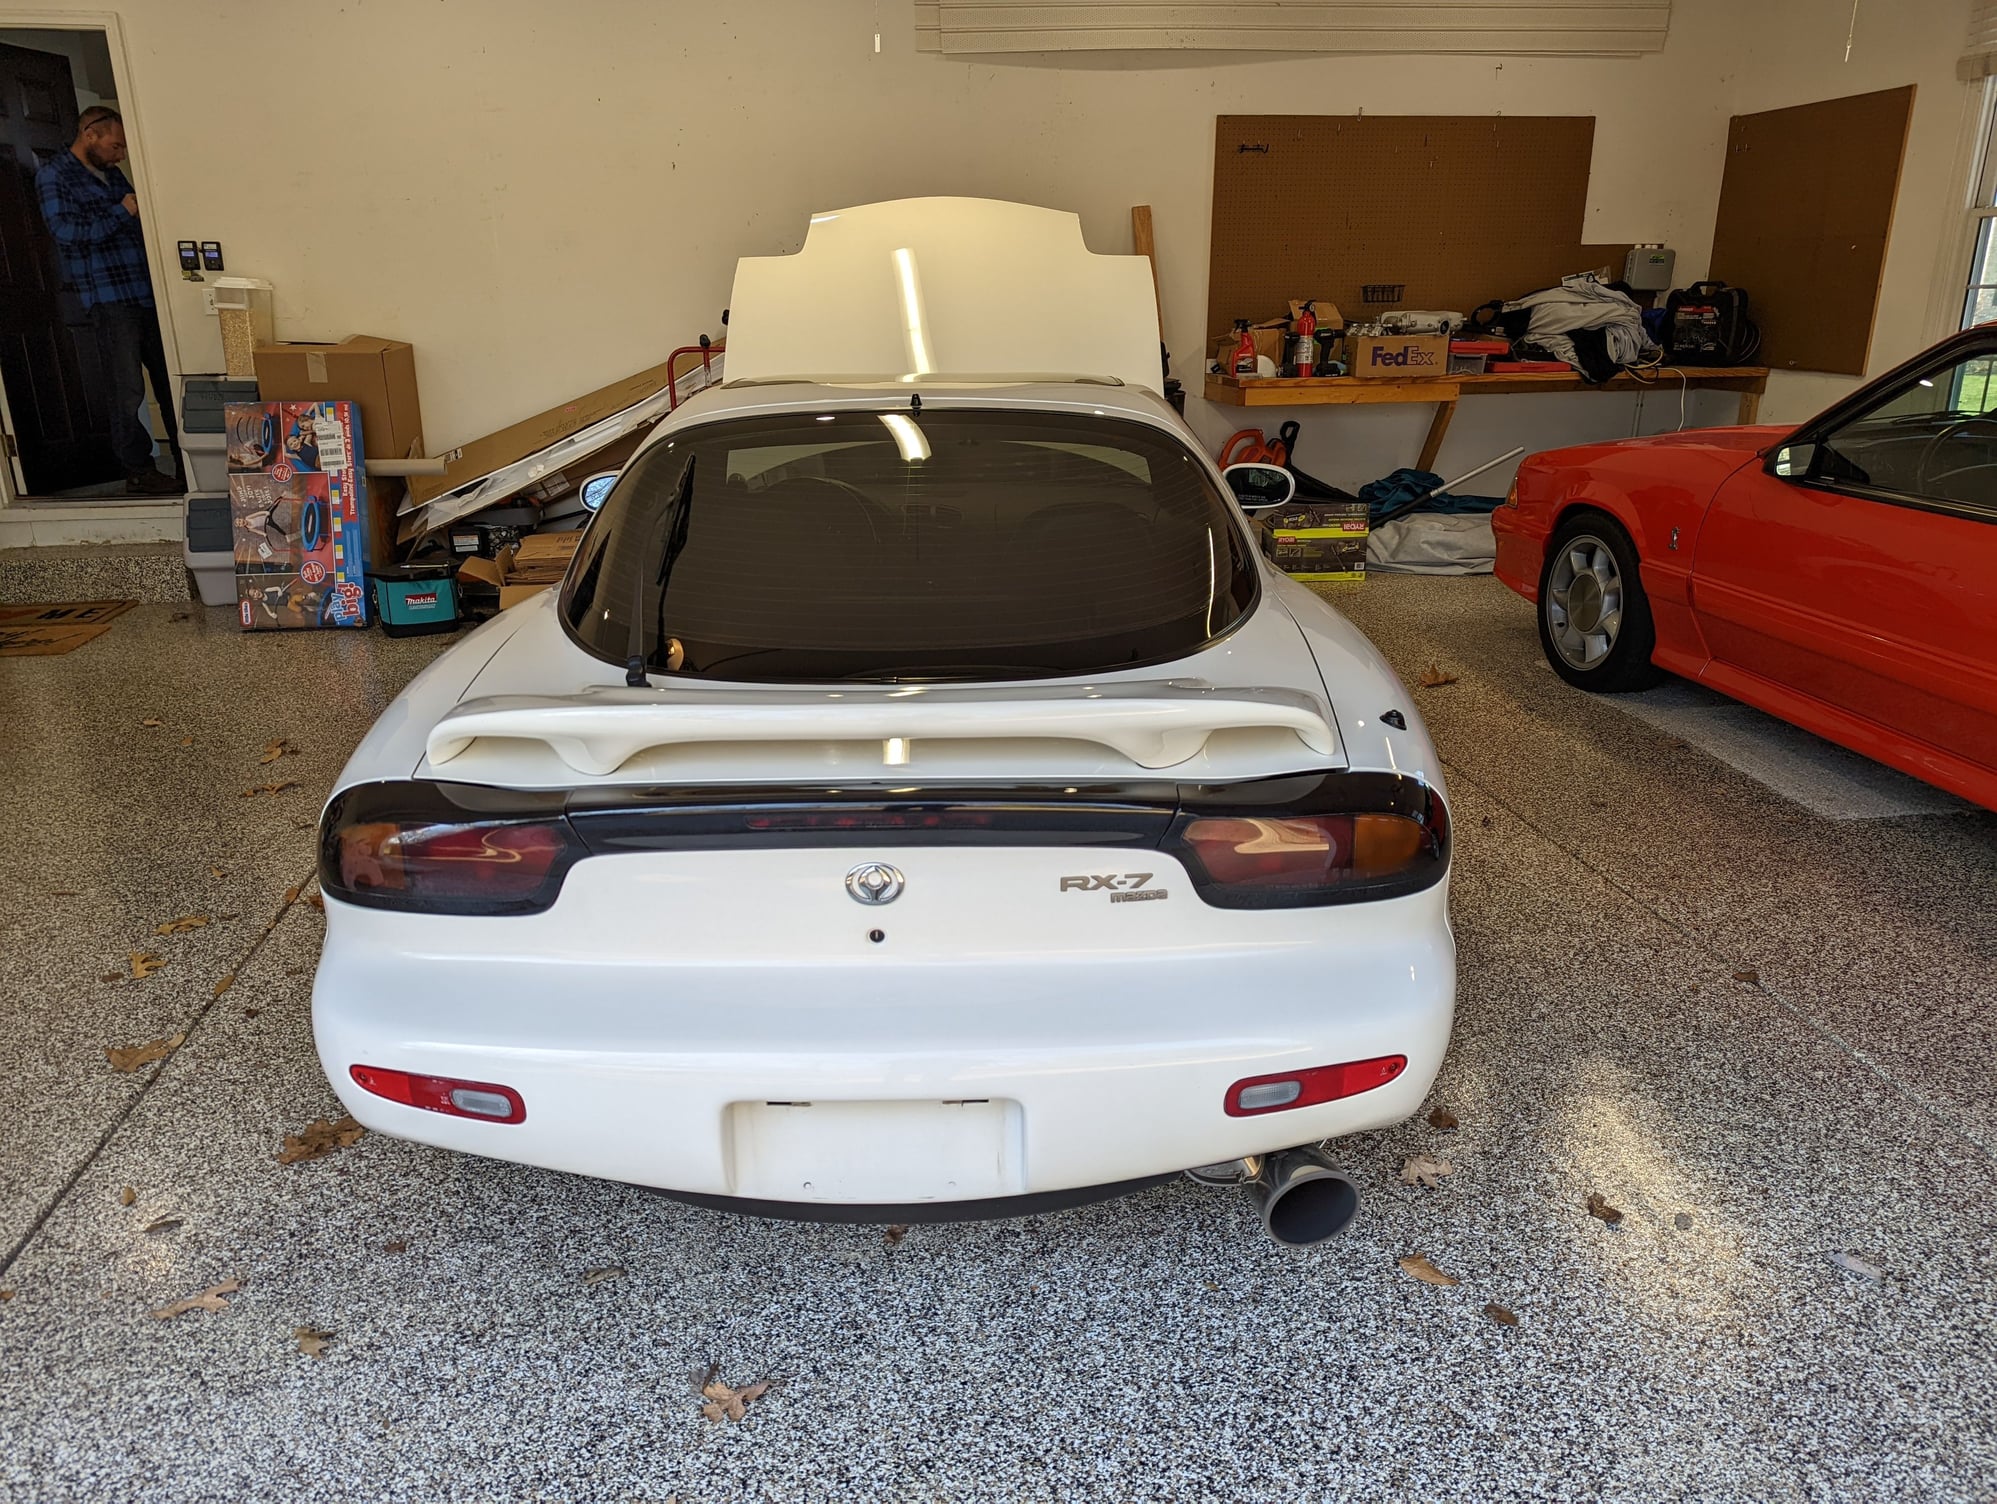 1994 Mazda RX-7 - 1994 Chaste white touring 29k original mile - Used - VIN JM1FD3334R0300286 - 29,077 Miles - Other - 2WD - Manual - Coupe - White - St. Peters, MO 63303, United States